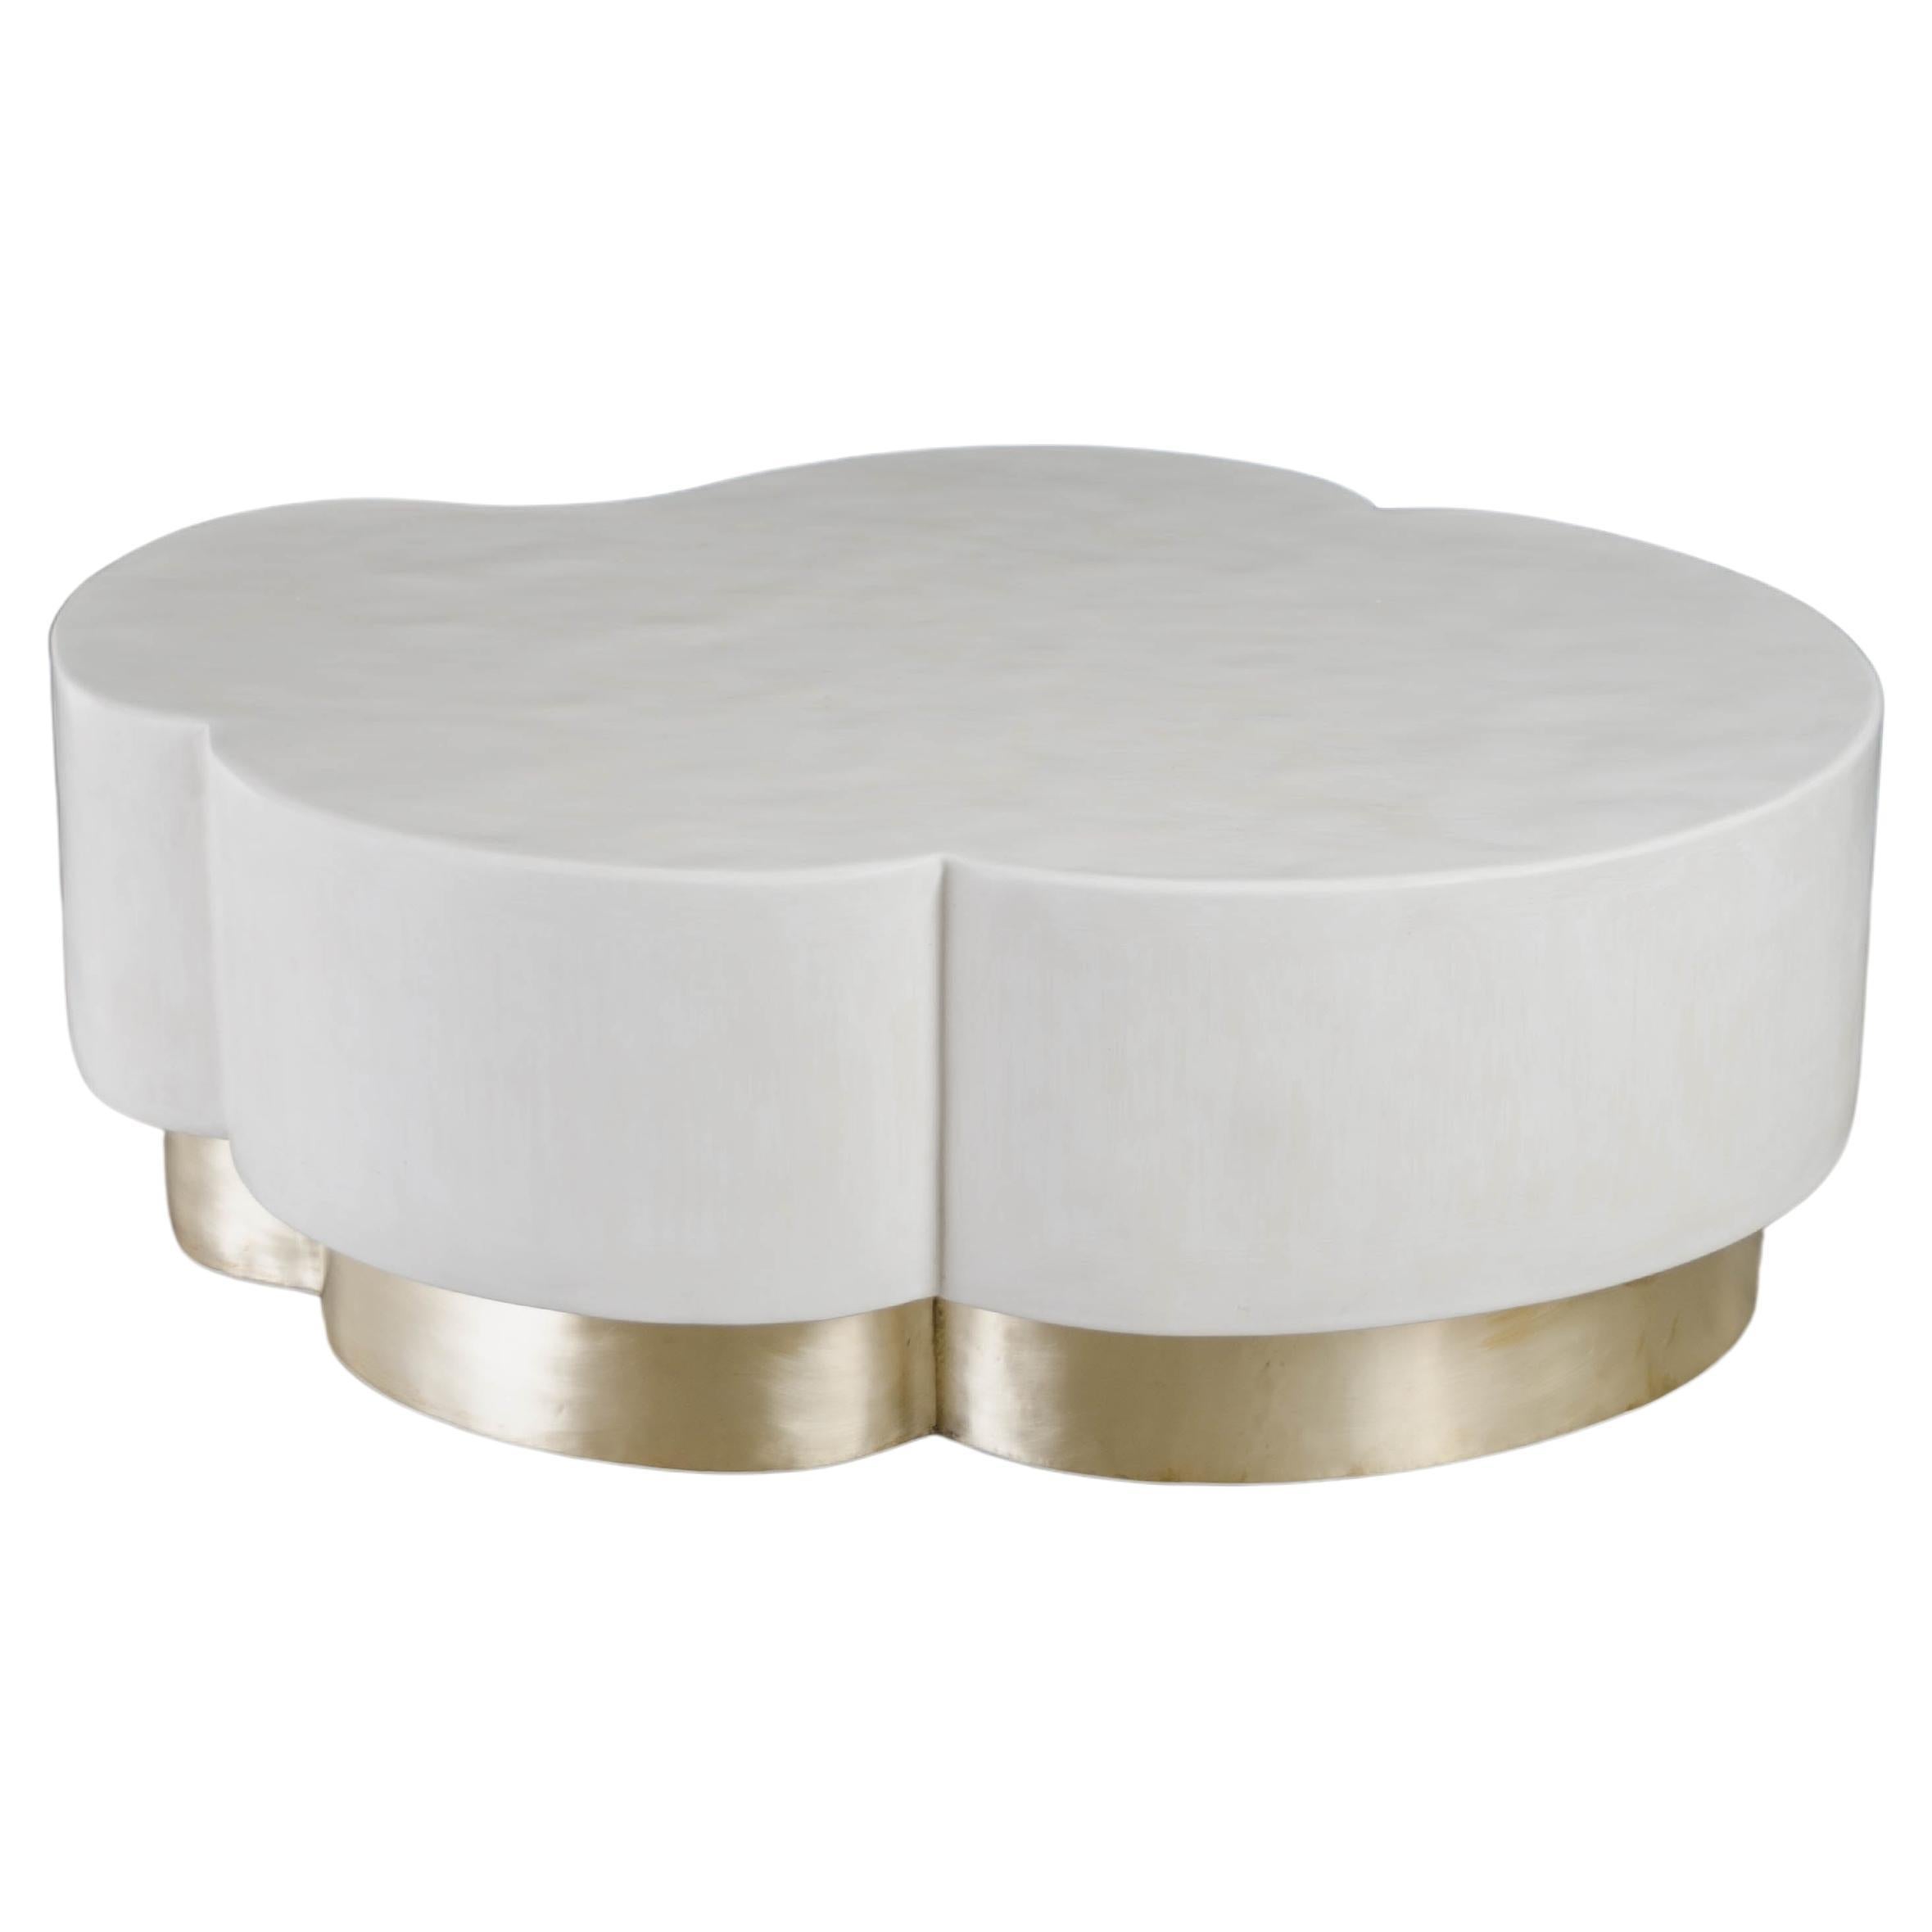 Contemporary Leaf Design Cocktail Table in Cream Lacquer w/ Brass by Robert Kuo